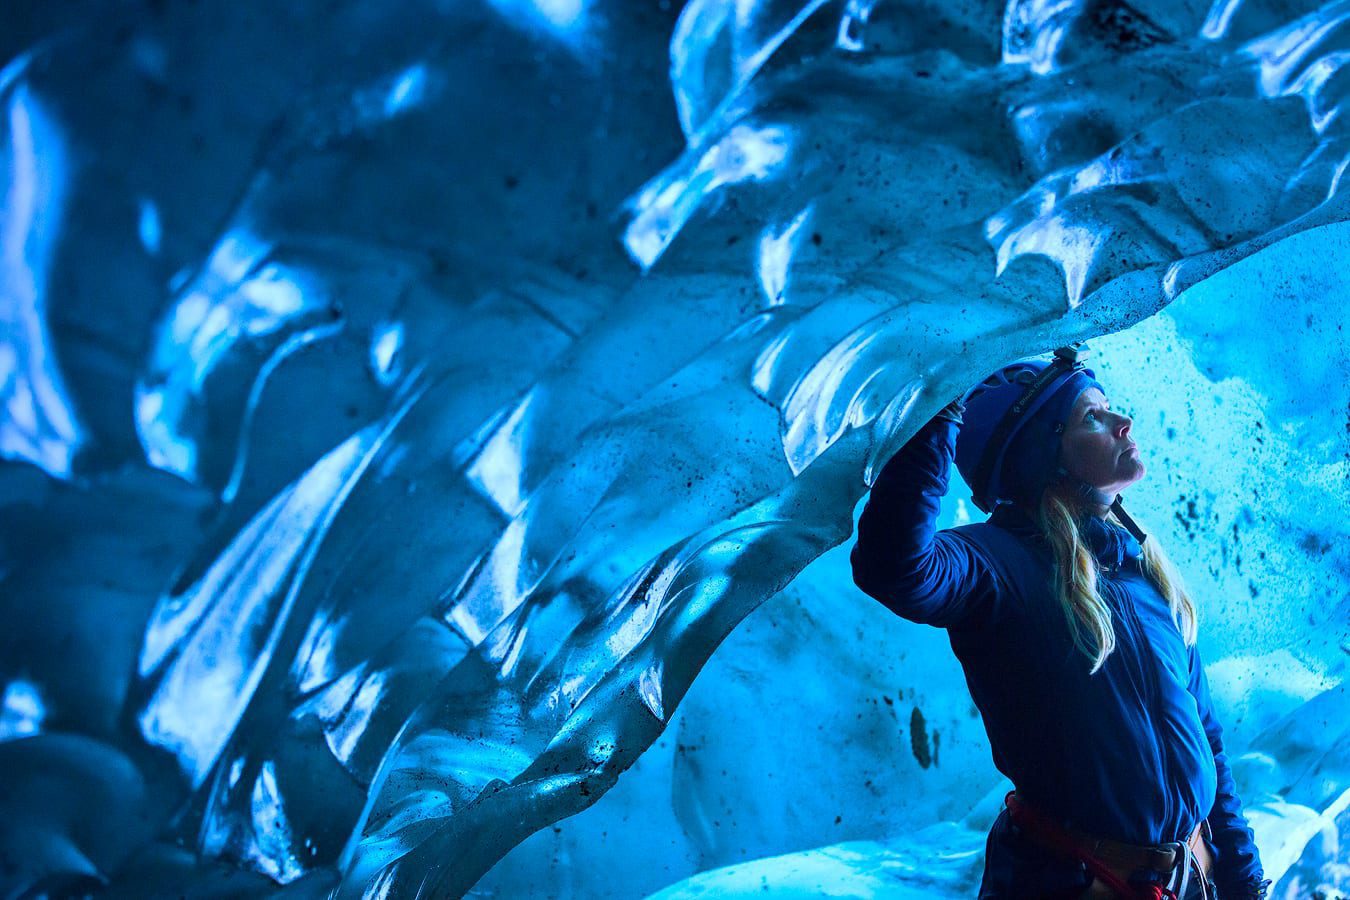 3 Day Winter Minibus Tour: South Coast, Blue Ice Cave, Golden Circle & Northern Lights File name: b0ea9ff0c75d2f77df472c